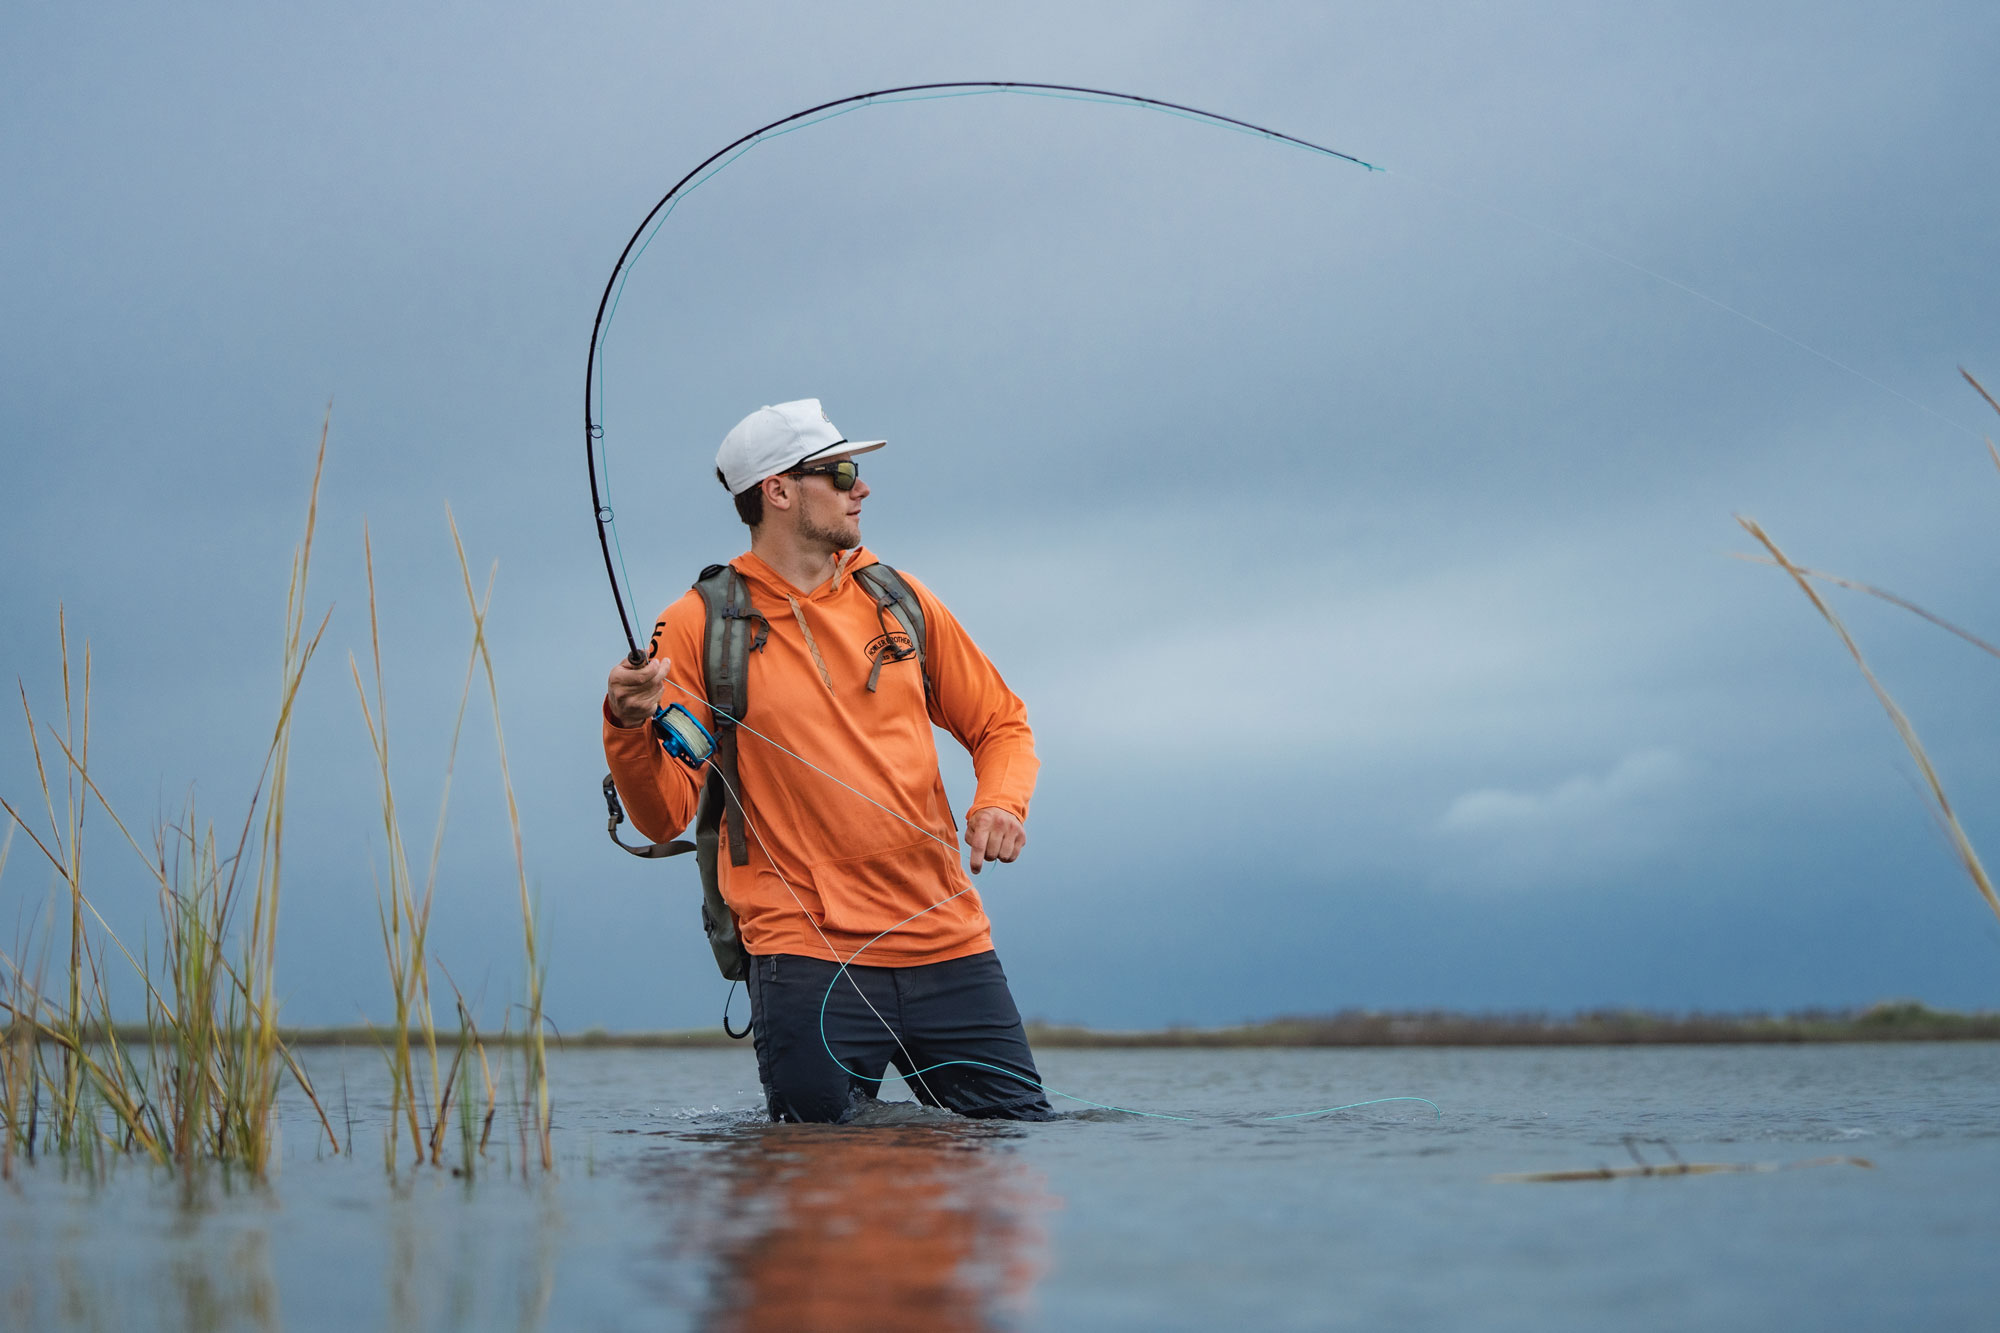 Man Casting a fly rod while wading in water